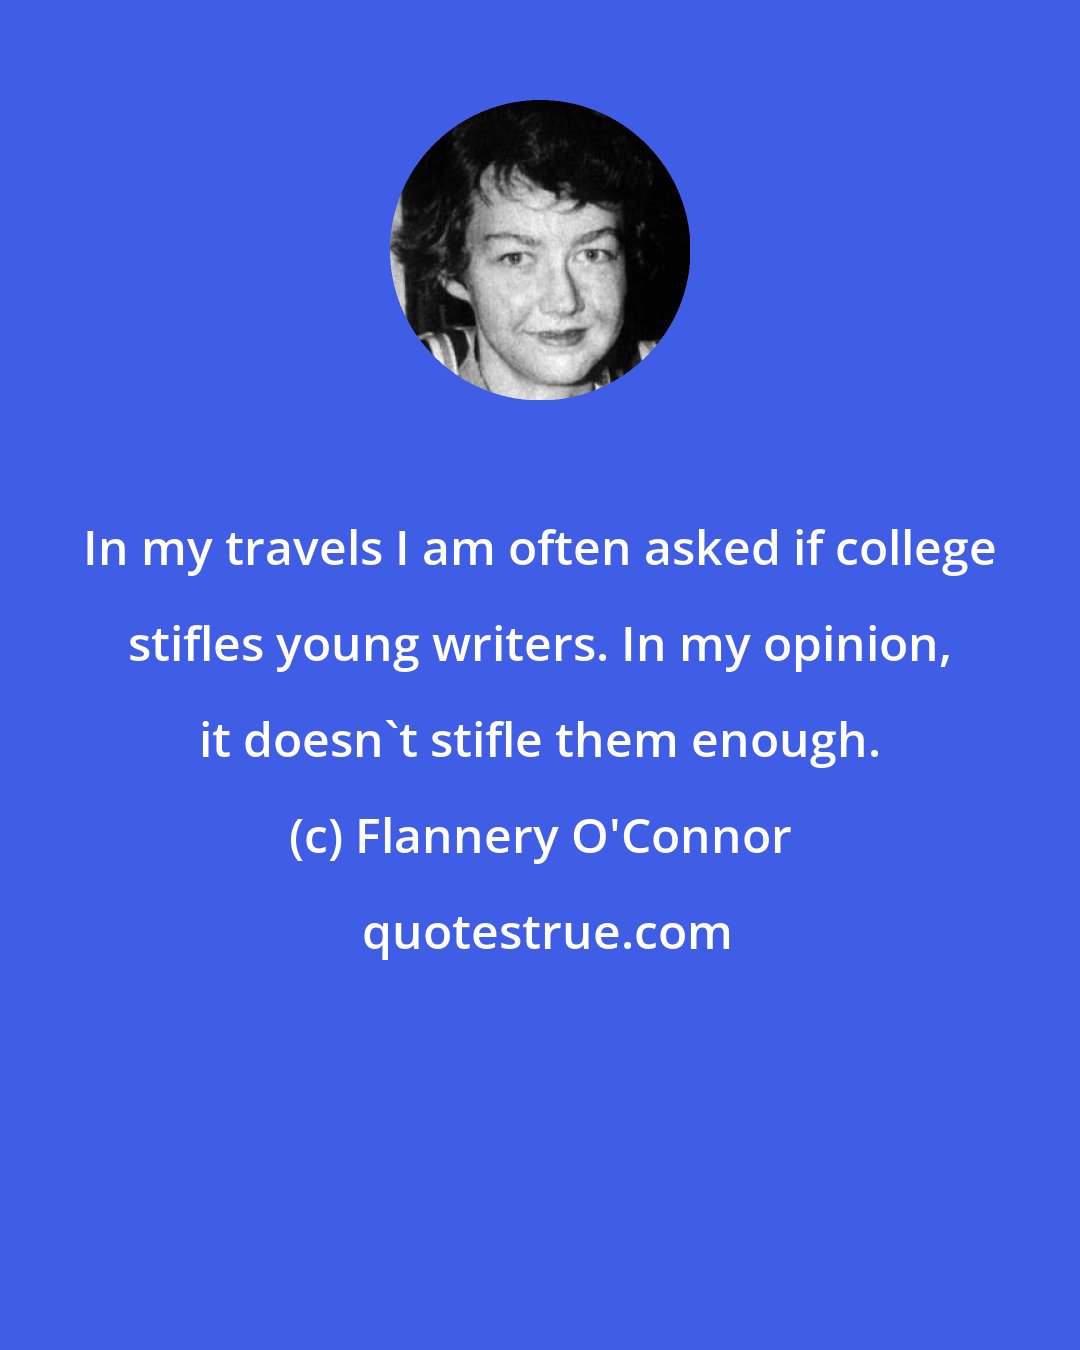 Flannery O'Connor: In my travels I am often asked if college stifles young writers. In my opinion, it doesn't stifle them enough.